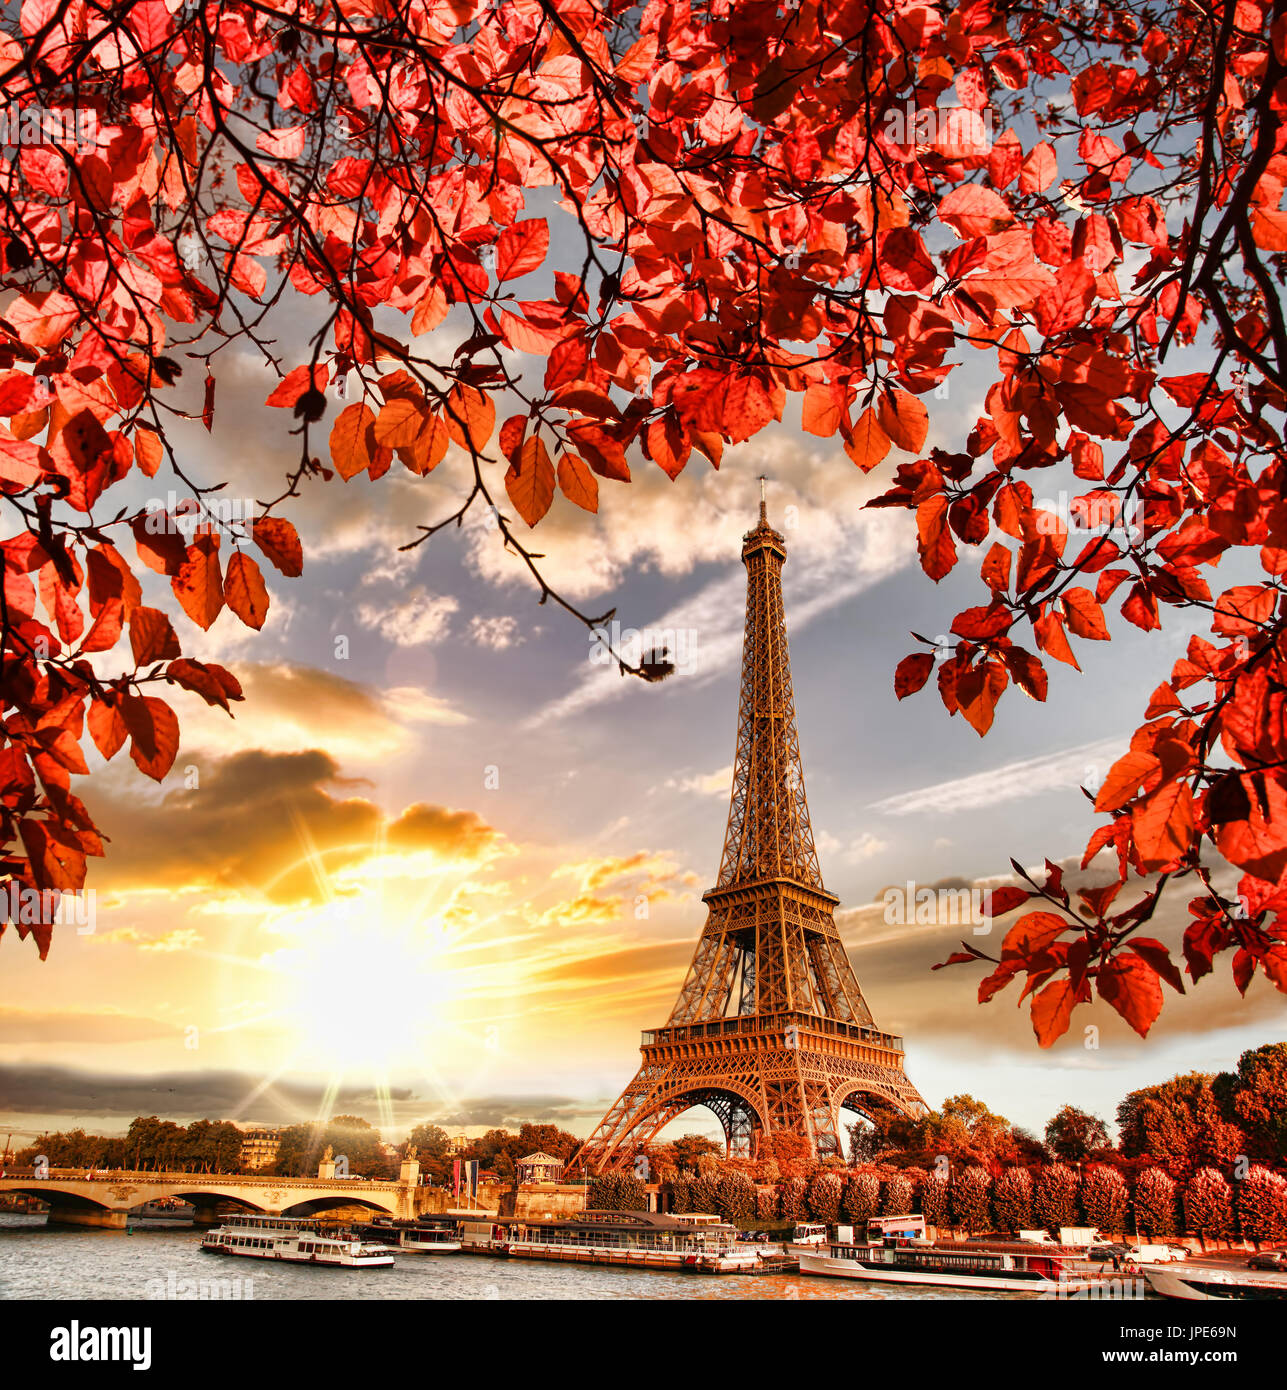 Eiffel Tower with autumn leaves in Paris, France Stock Photo